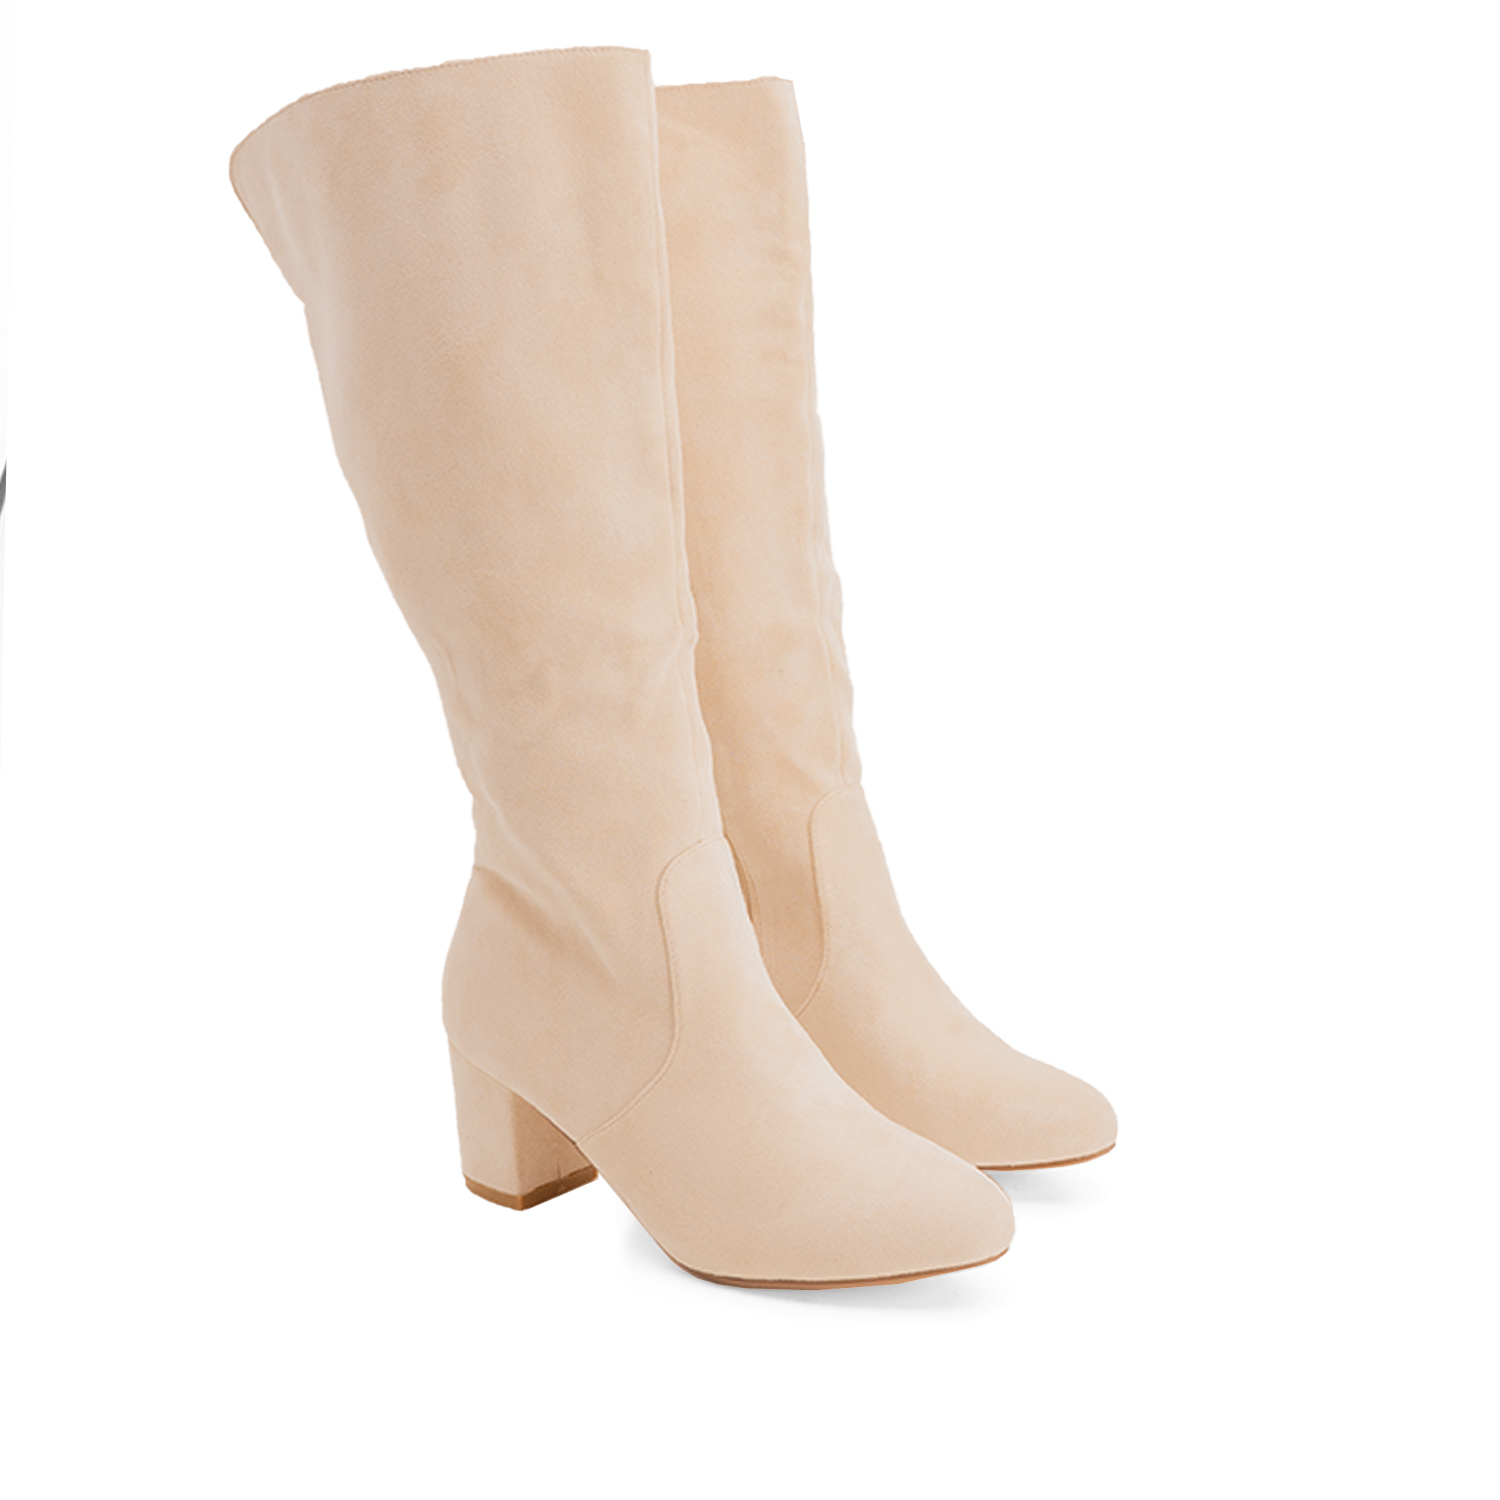 Heeled mid-calf boots in off-white faux suede 